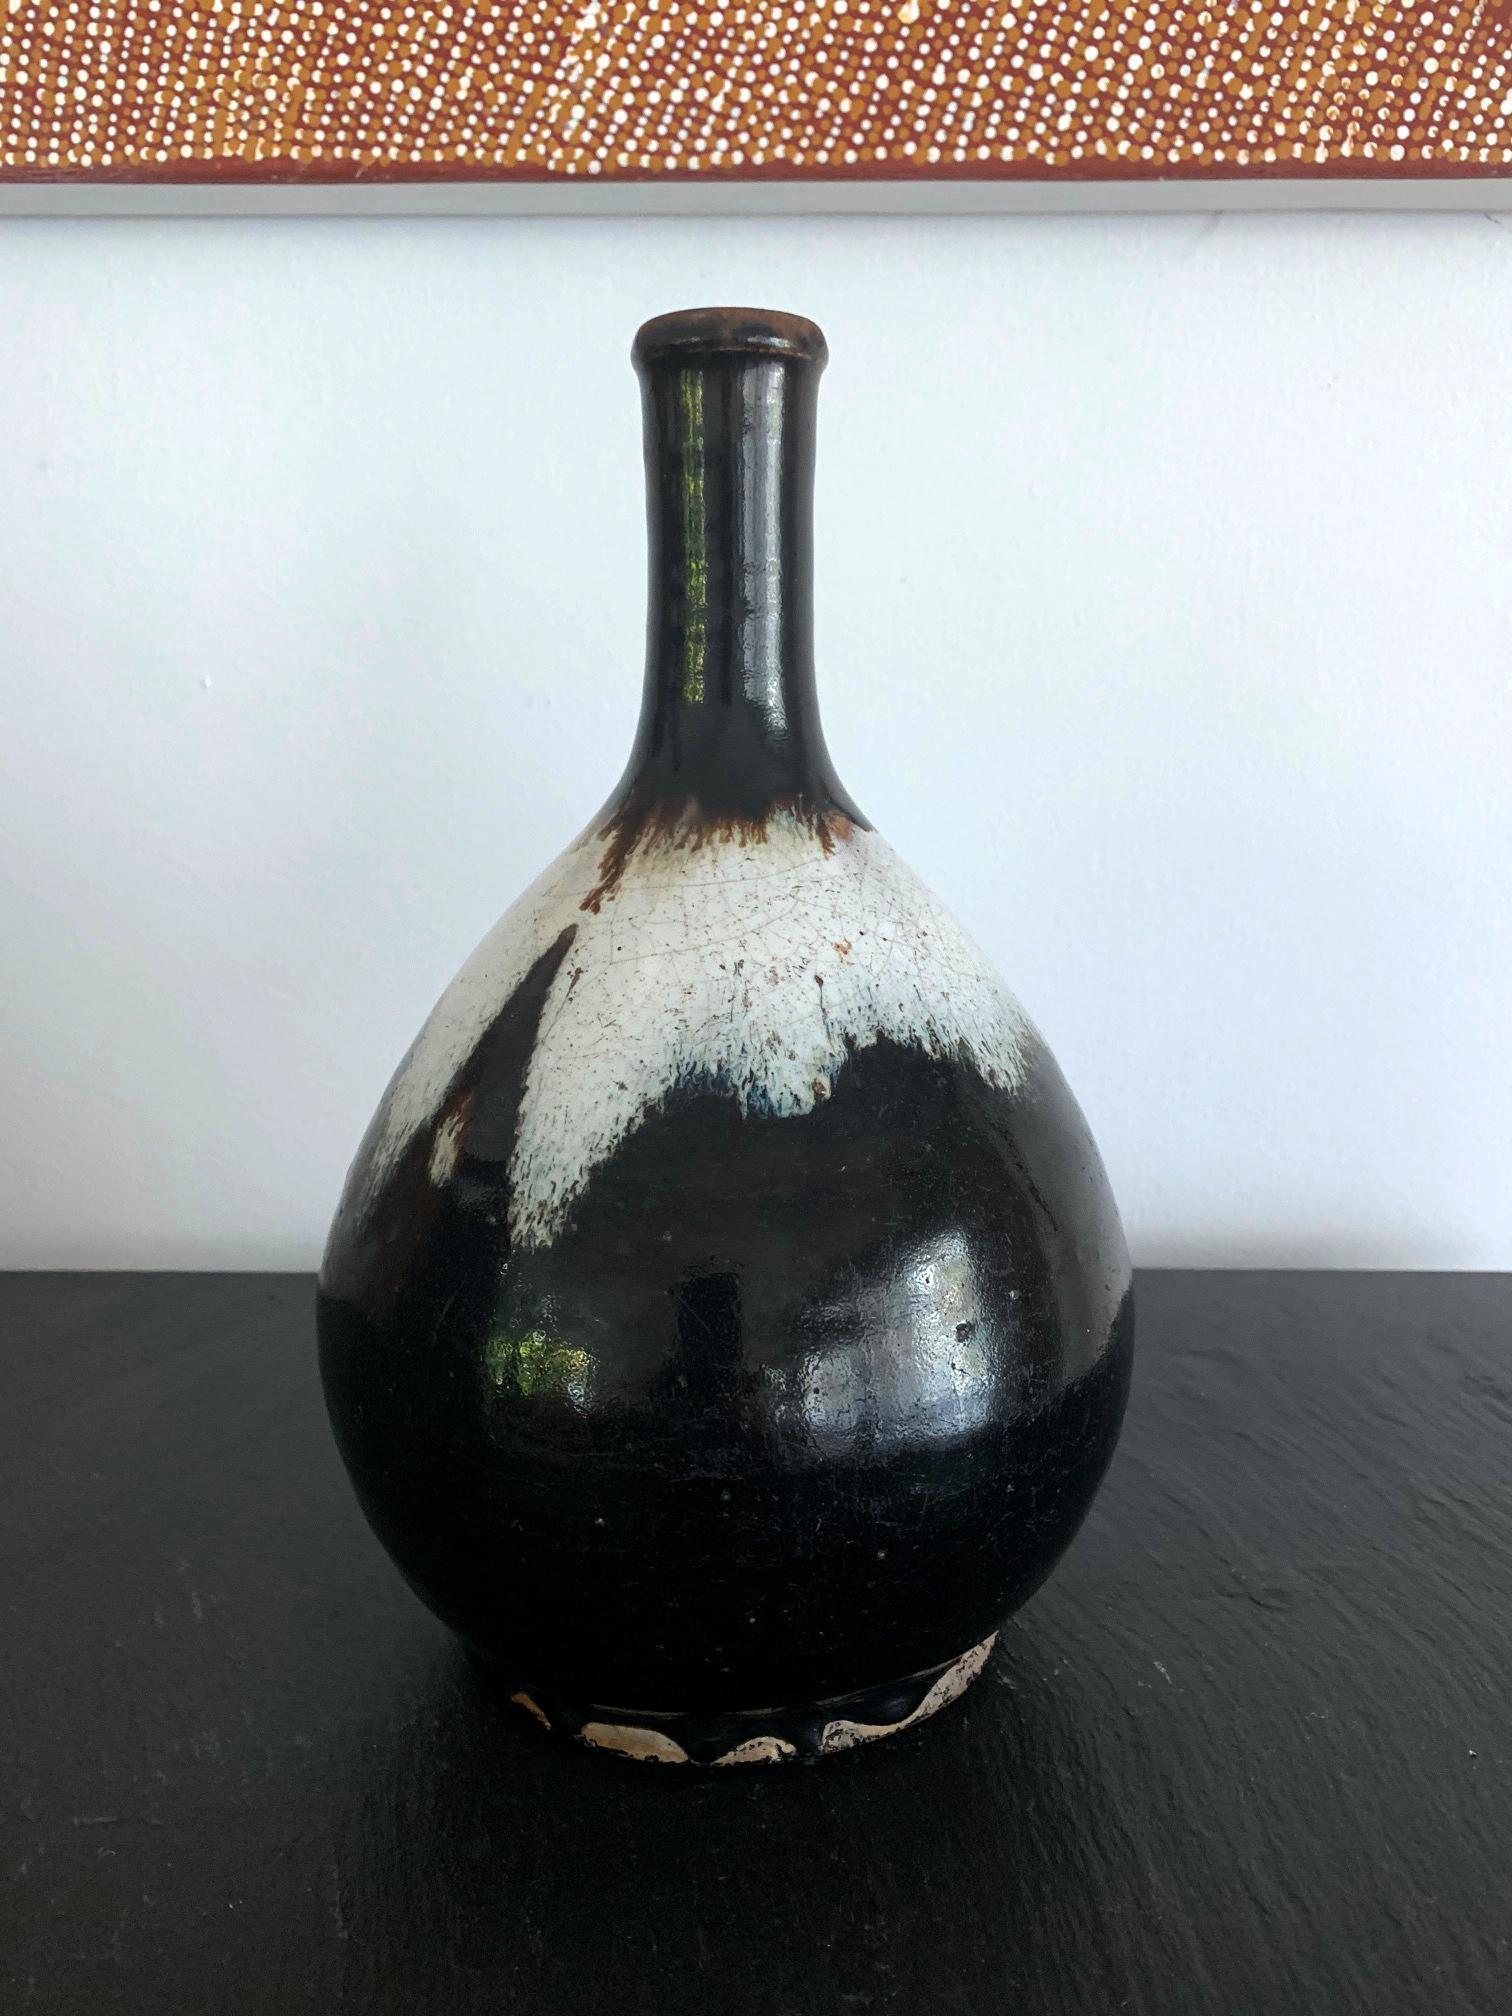 The long neck bottle of classic form was heavily potted with coarse clay with high iron content. The flask, circa 18th century Edo period, was purposed for sake storage but also substituted as a flower vase during tea ceremony. The surface is